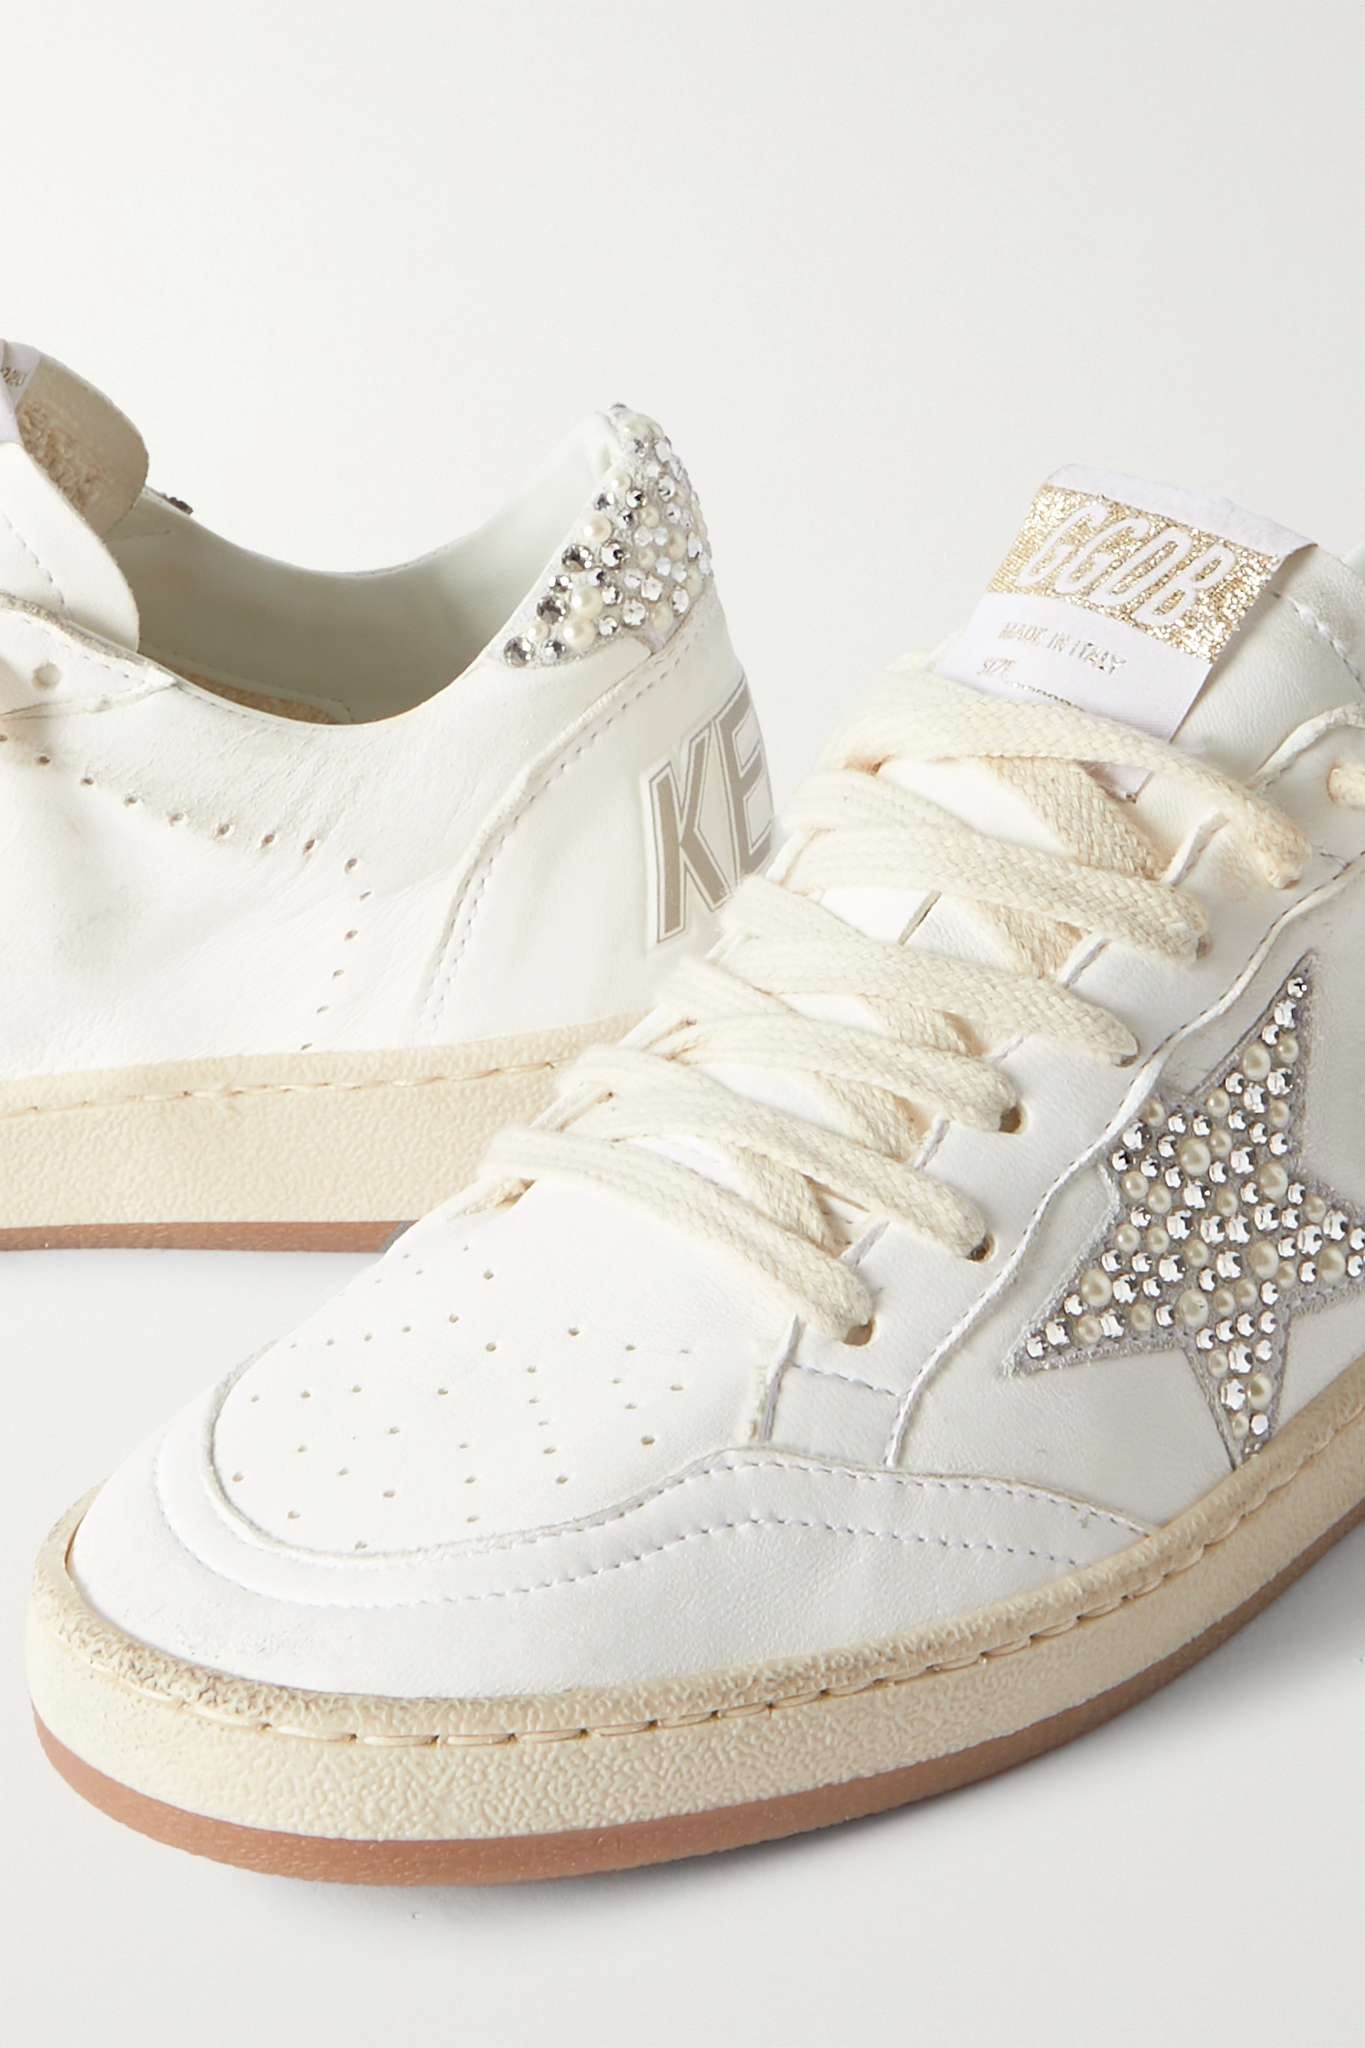 Golden Goose Ball Star shearling-lined embellished distressed leather  sneakers | REVERSIBLE